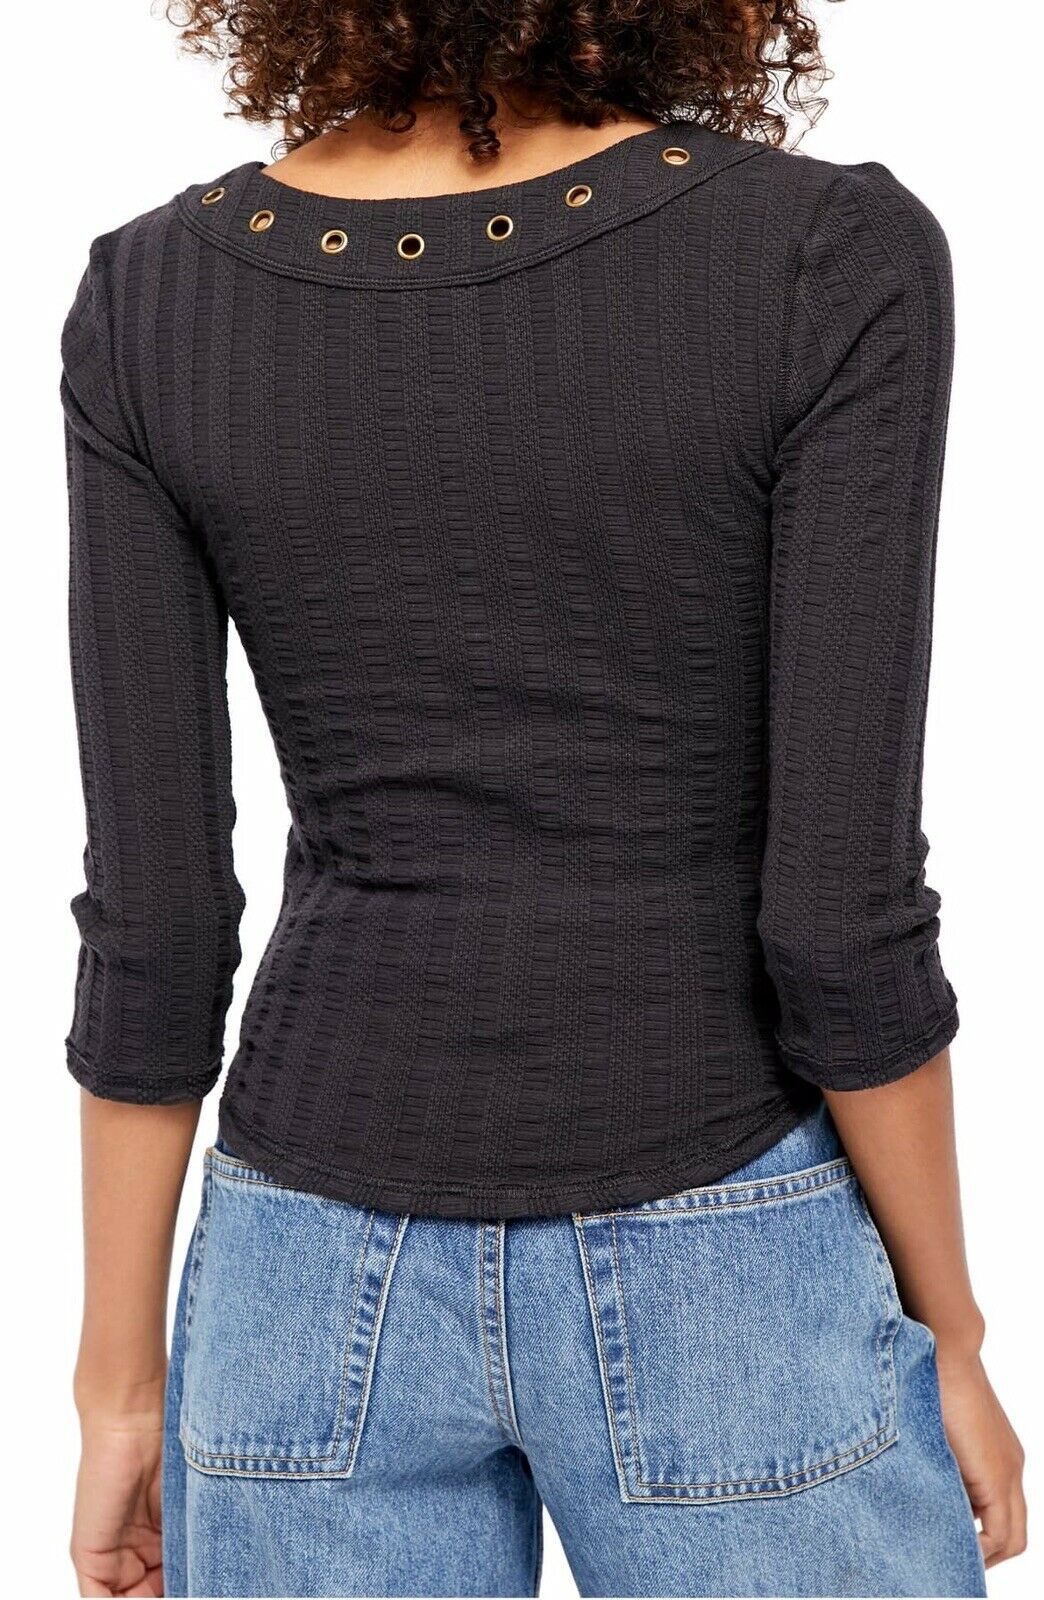 Color: Blacks Size Type: Regular Size (Women's): XS Sleeve Length: 3/4 Sleeve Type: Blouse Style: Knit Top Neckline: V-Neck Pattern: Solid Theme: Classic Material: Cotton Blends